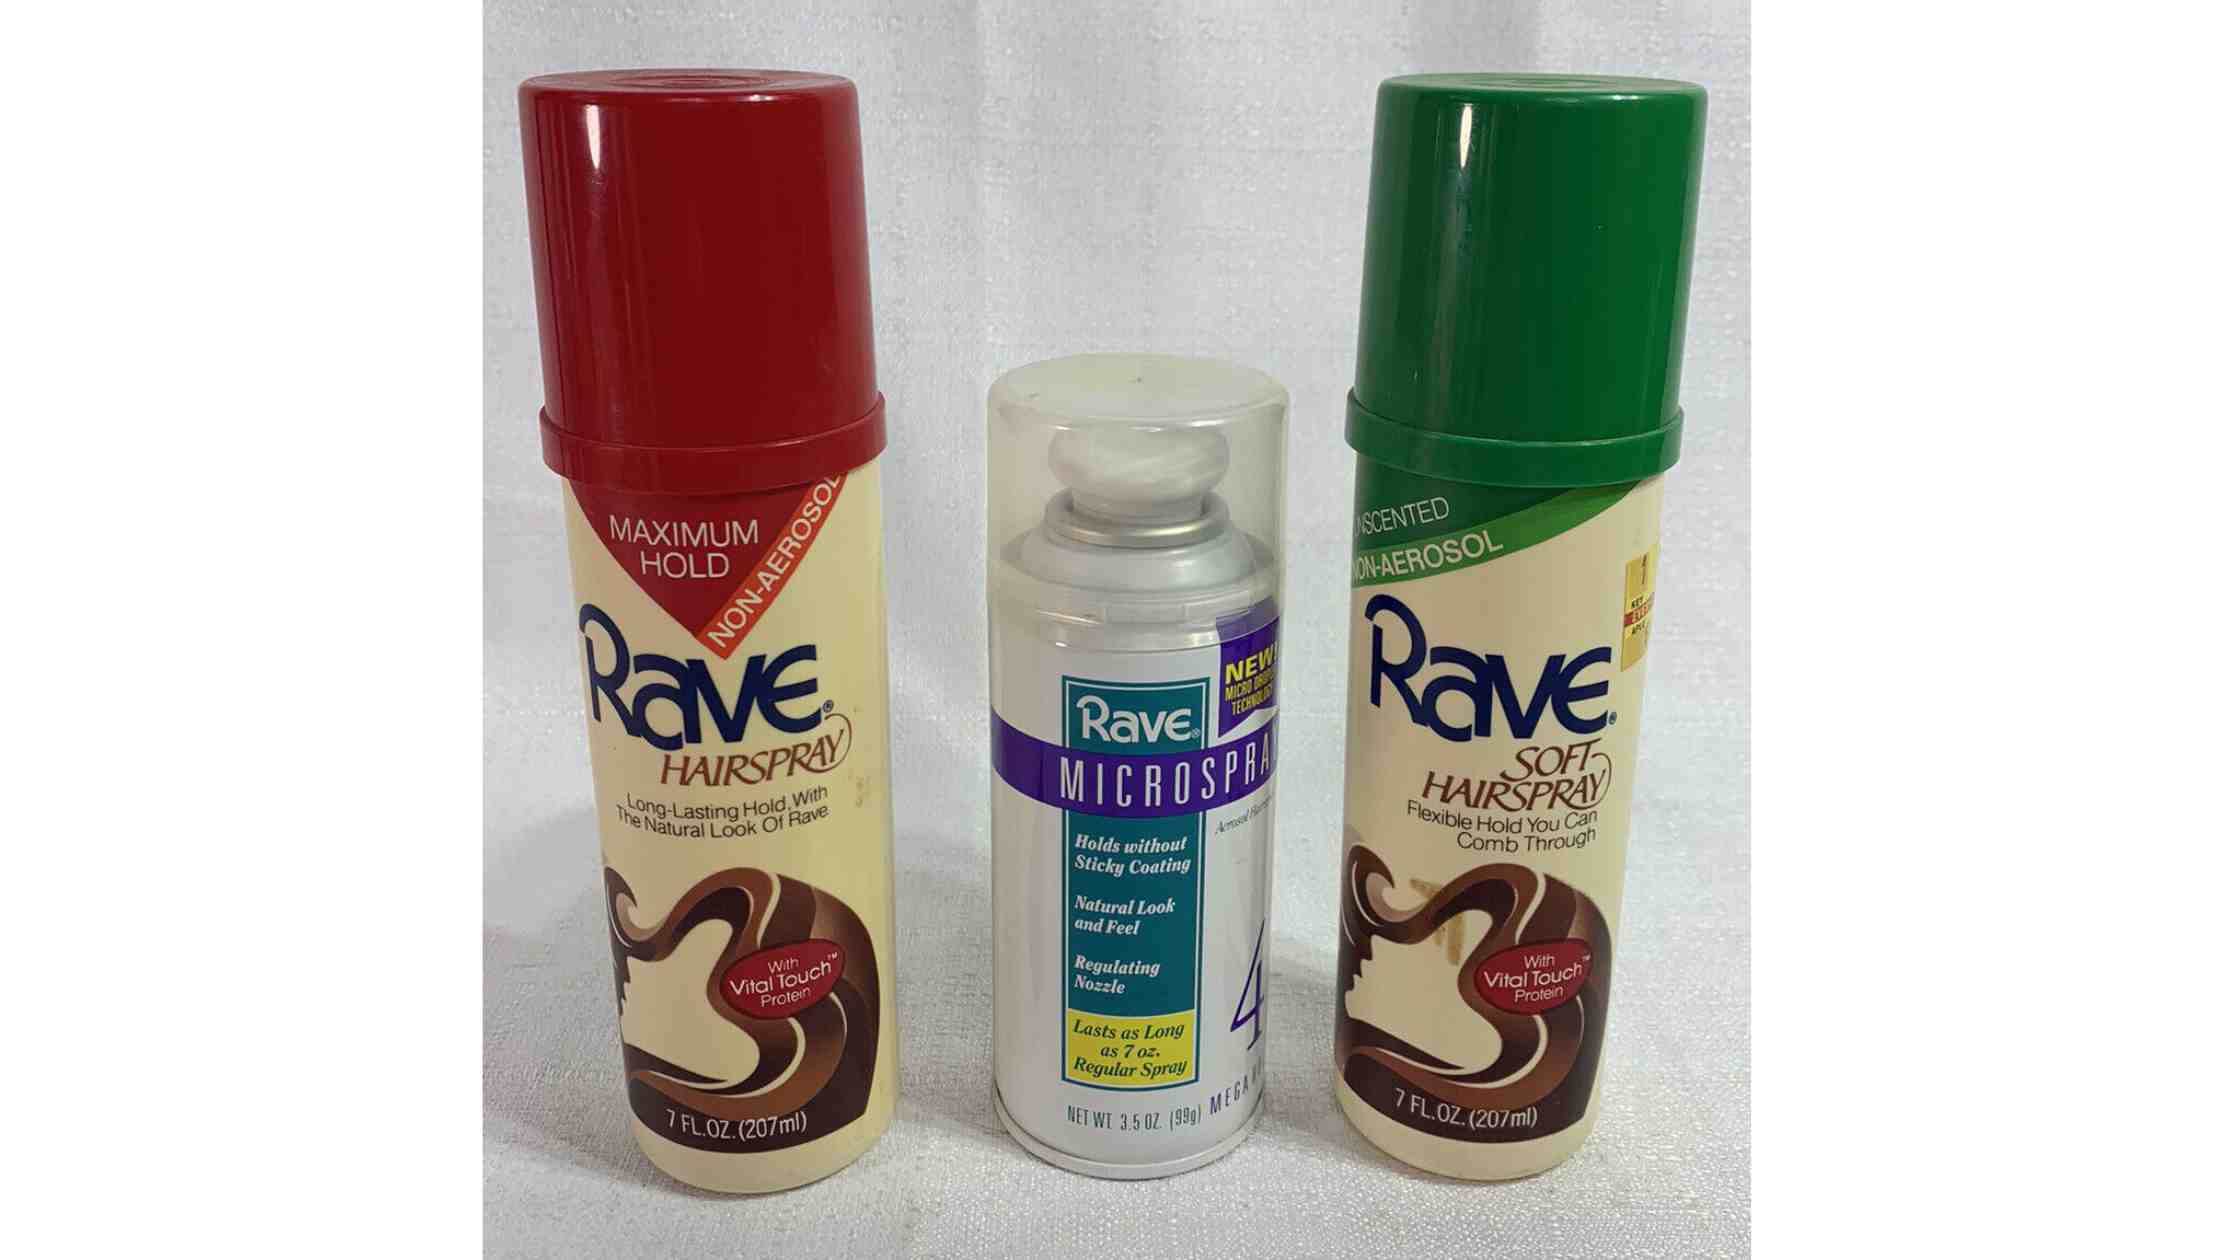 Rave Hairspray discontinued